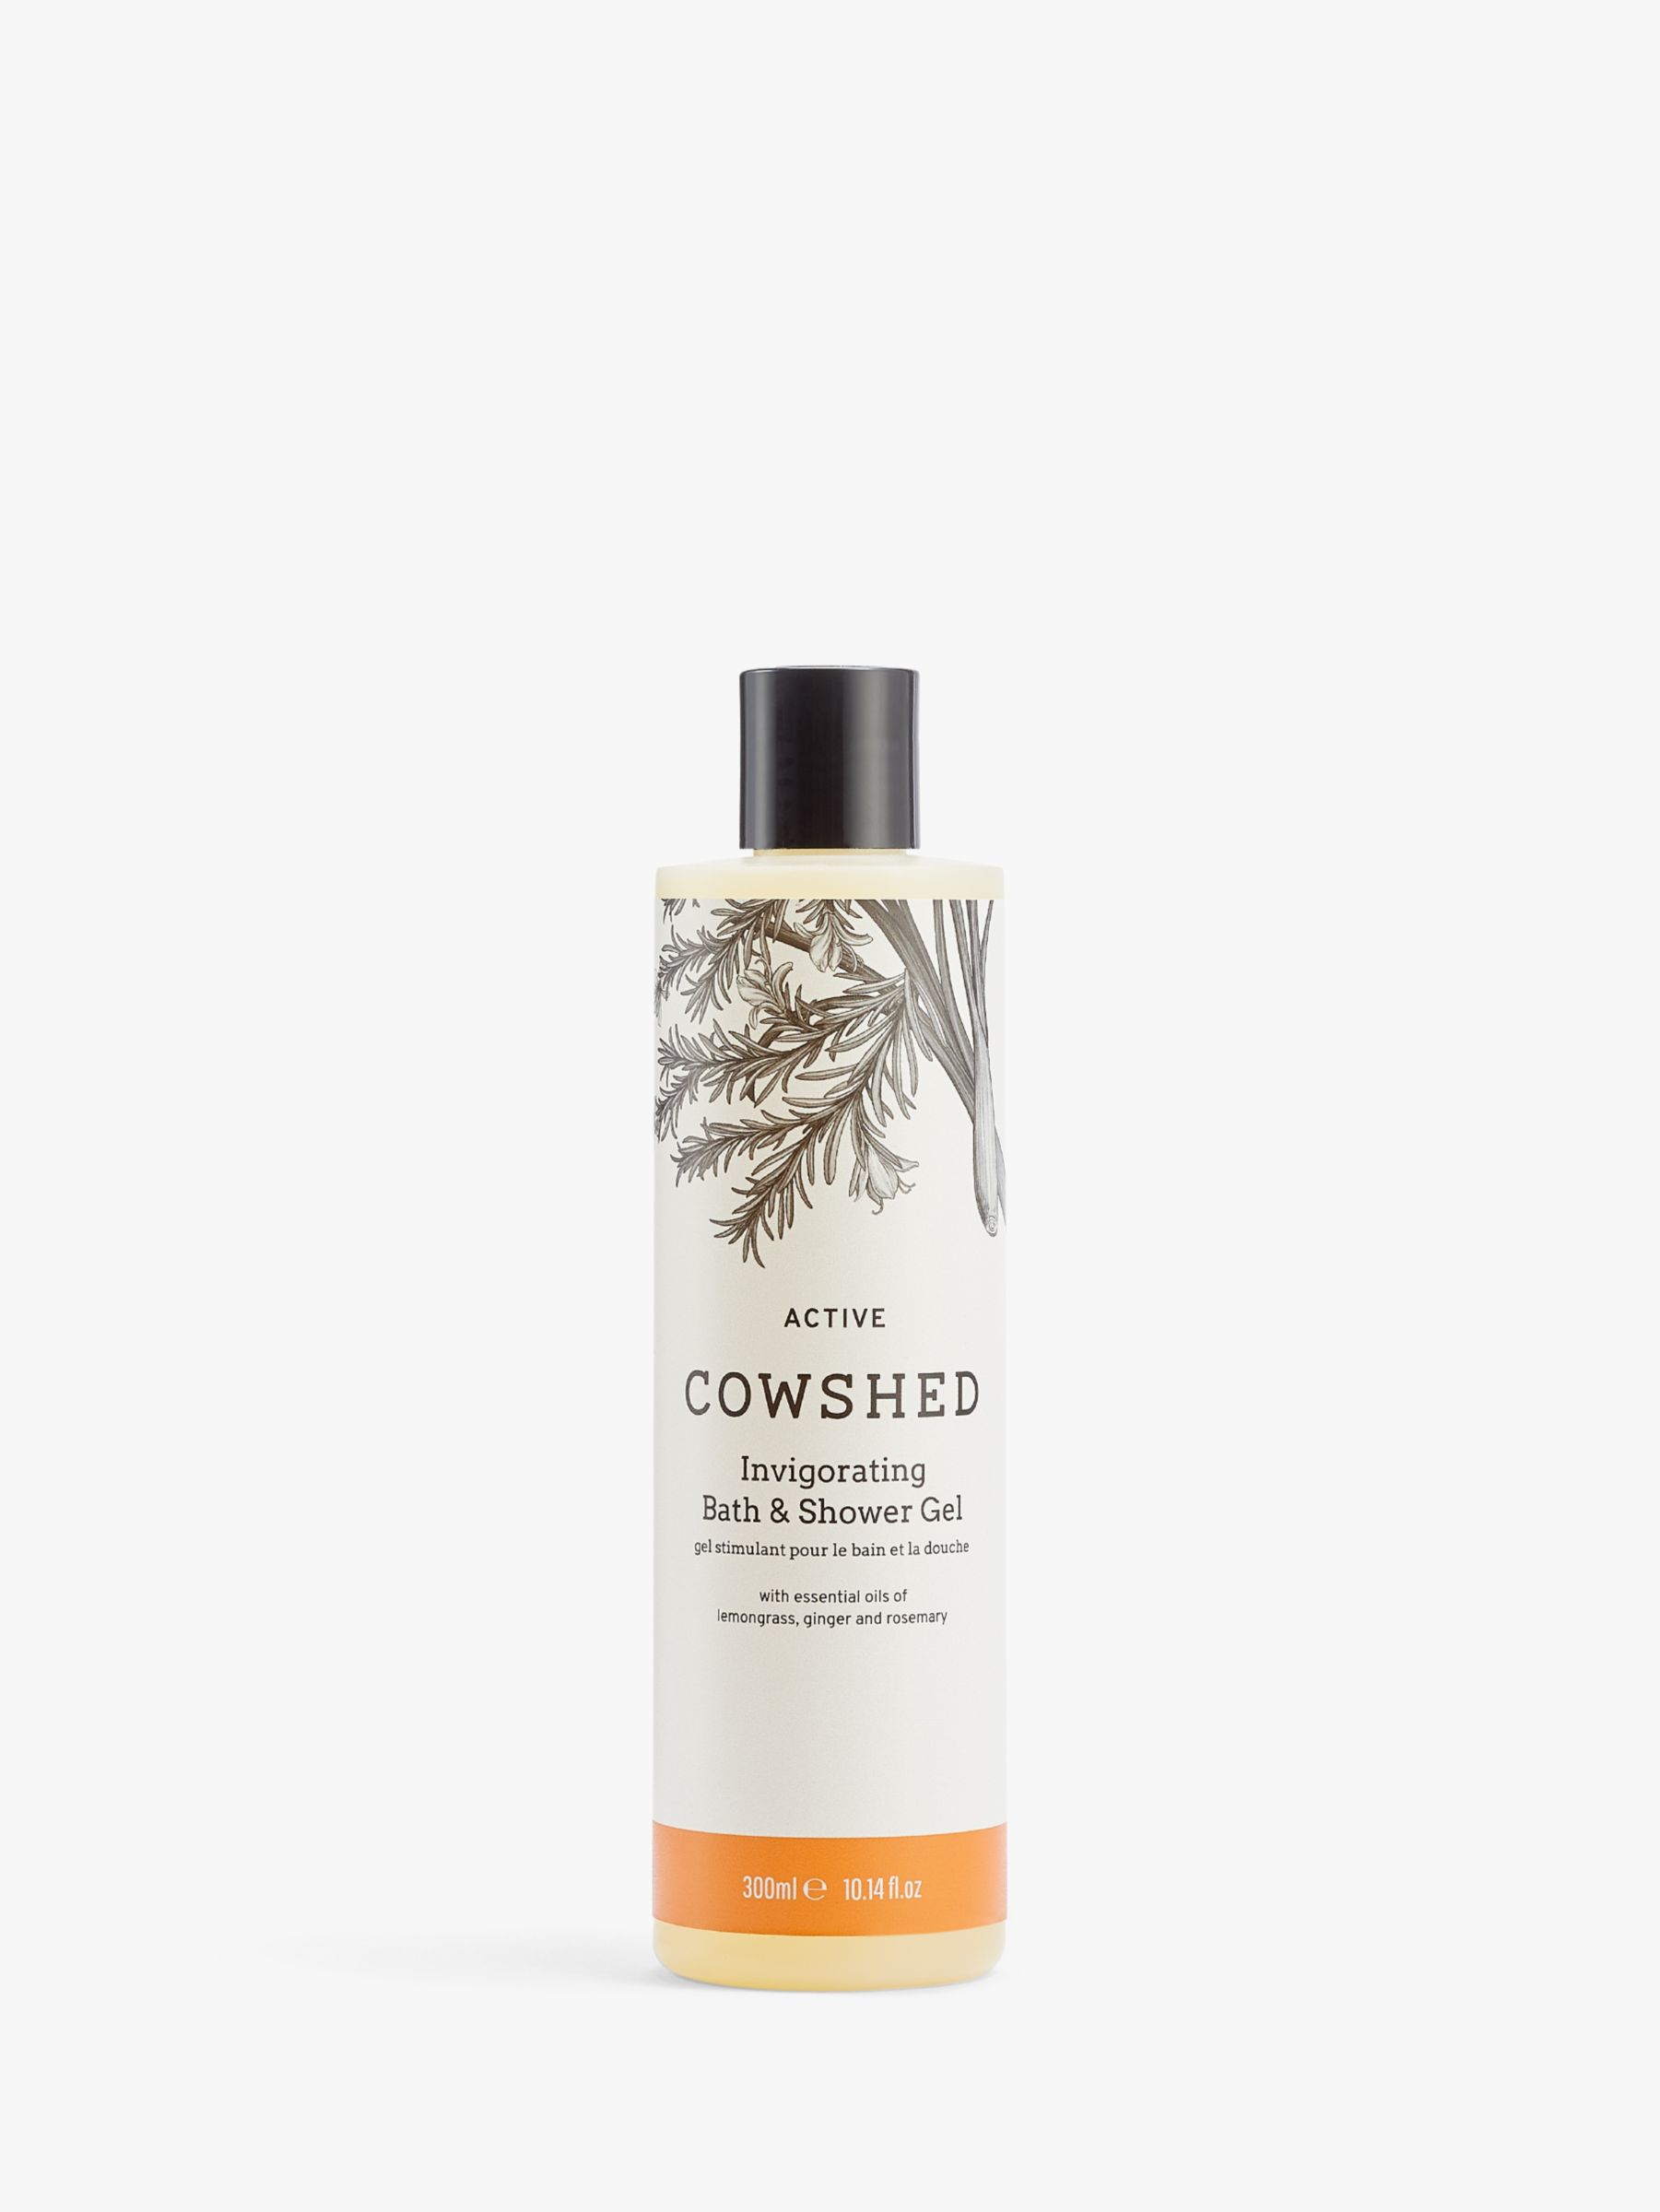 Cowshed Active Invigorating Bath & Shower Gel, 300ml 1